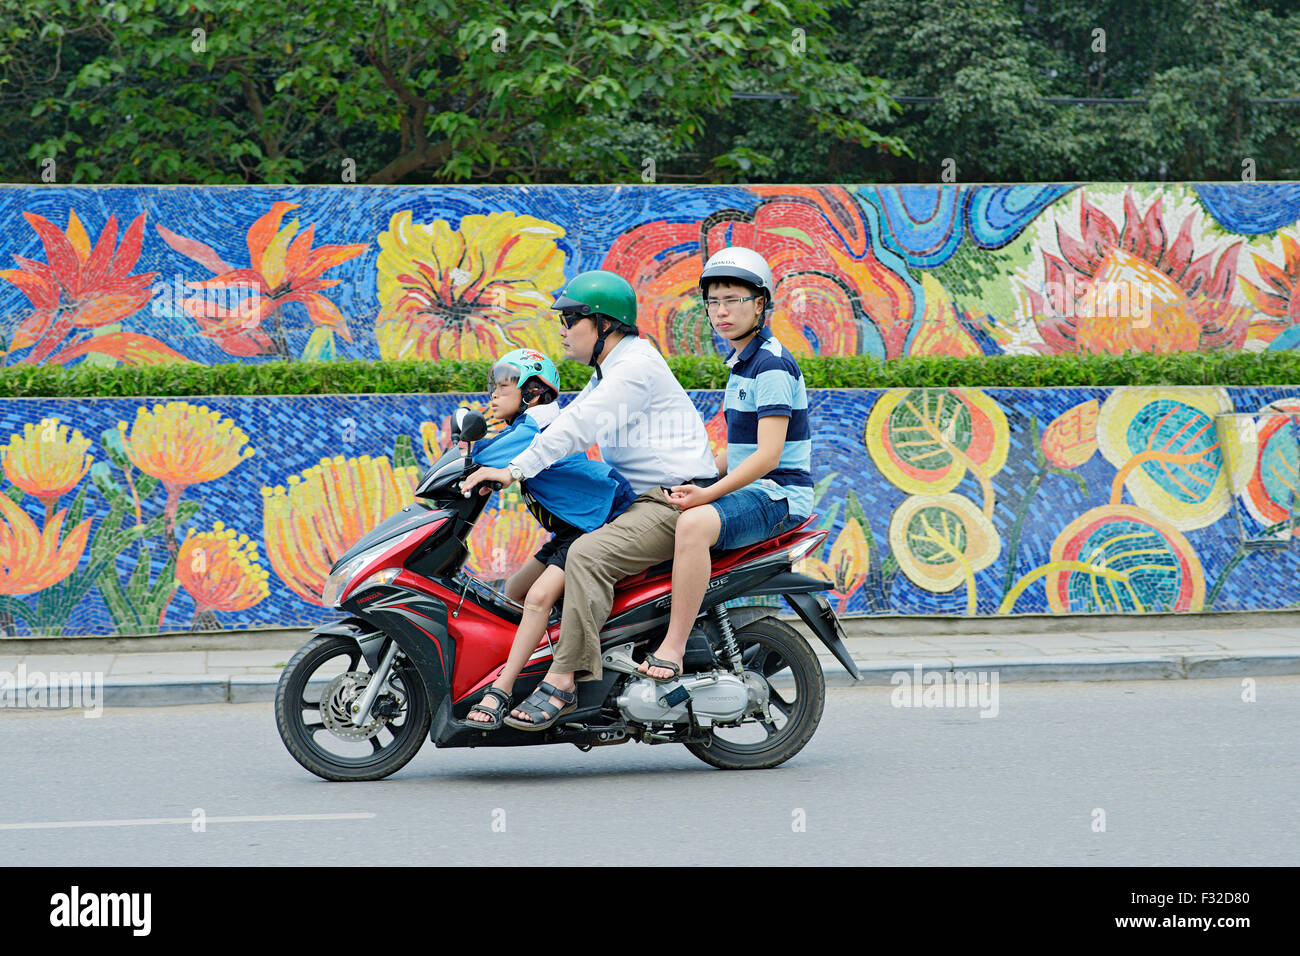 Mopeds and motorbikes are everywhere in Hanoi, Vietnam. It's not rare to see a whole family riding on only one scooter. Stock Photo